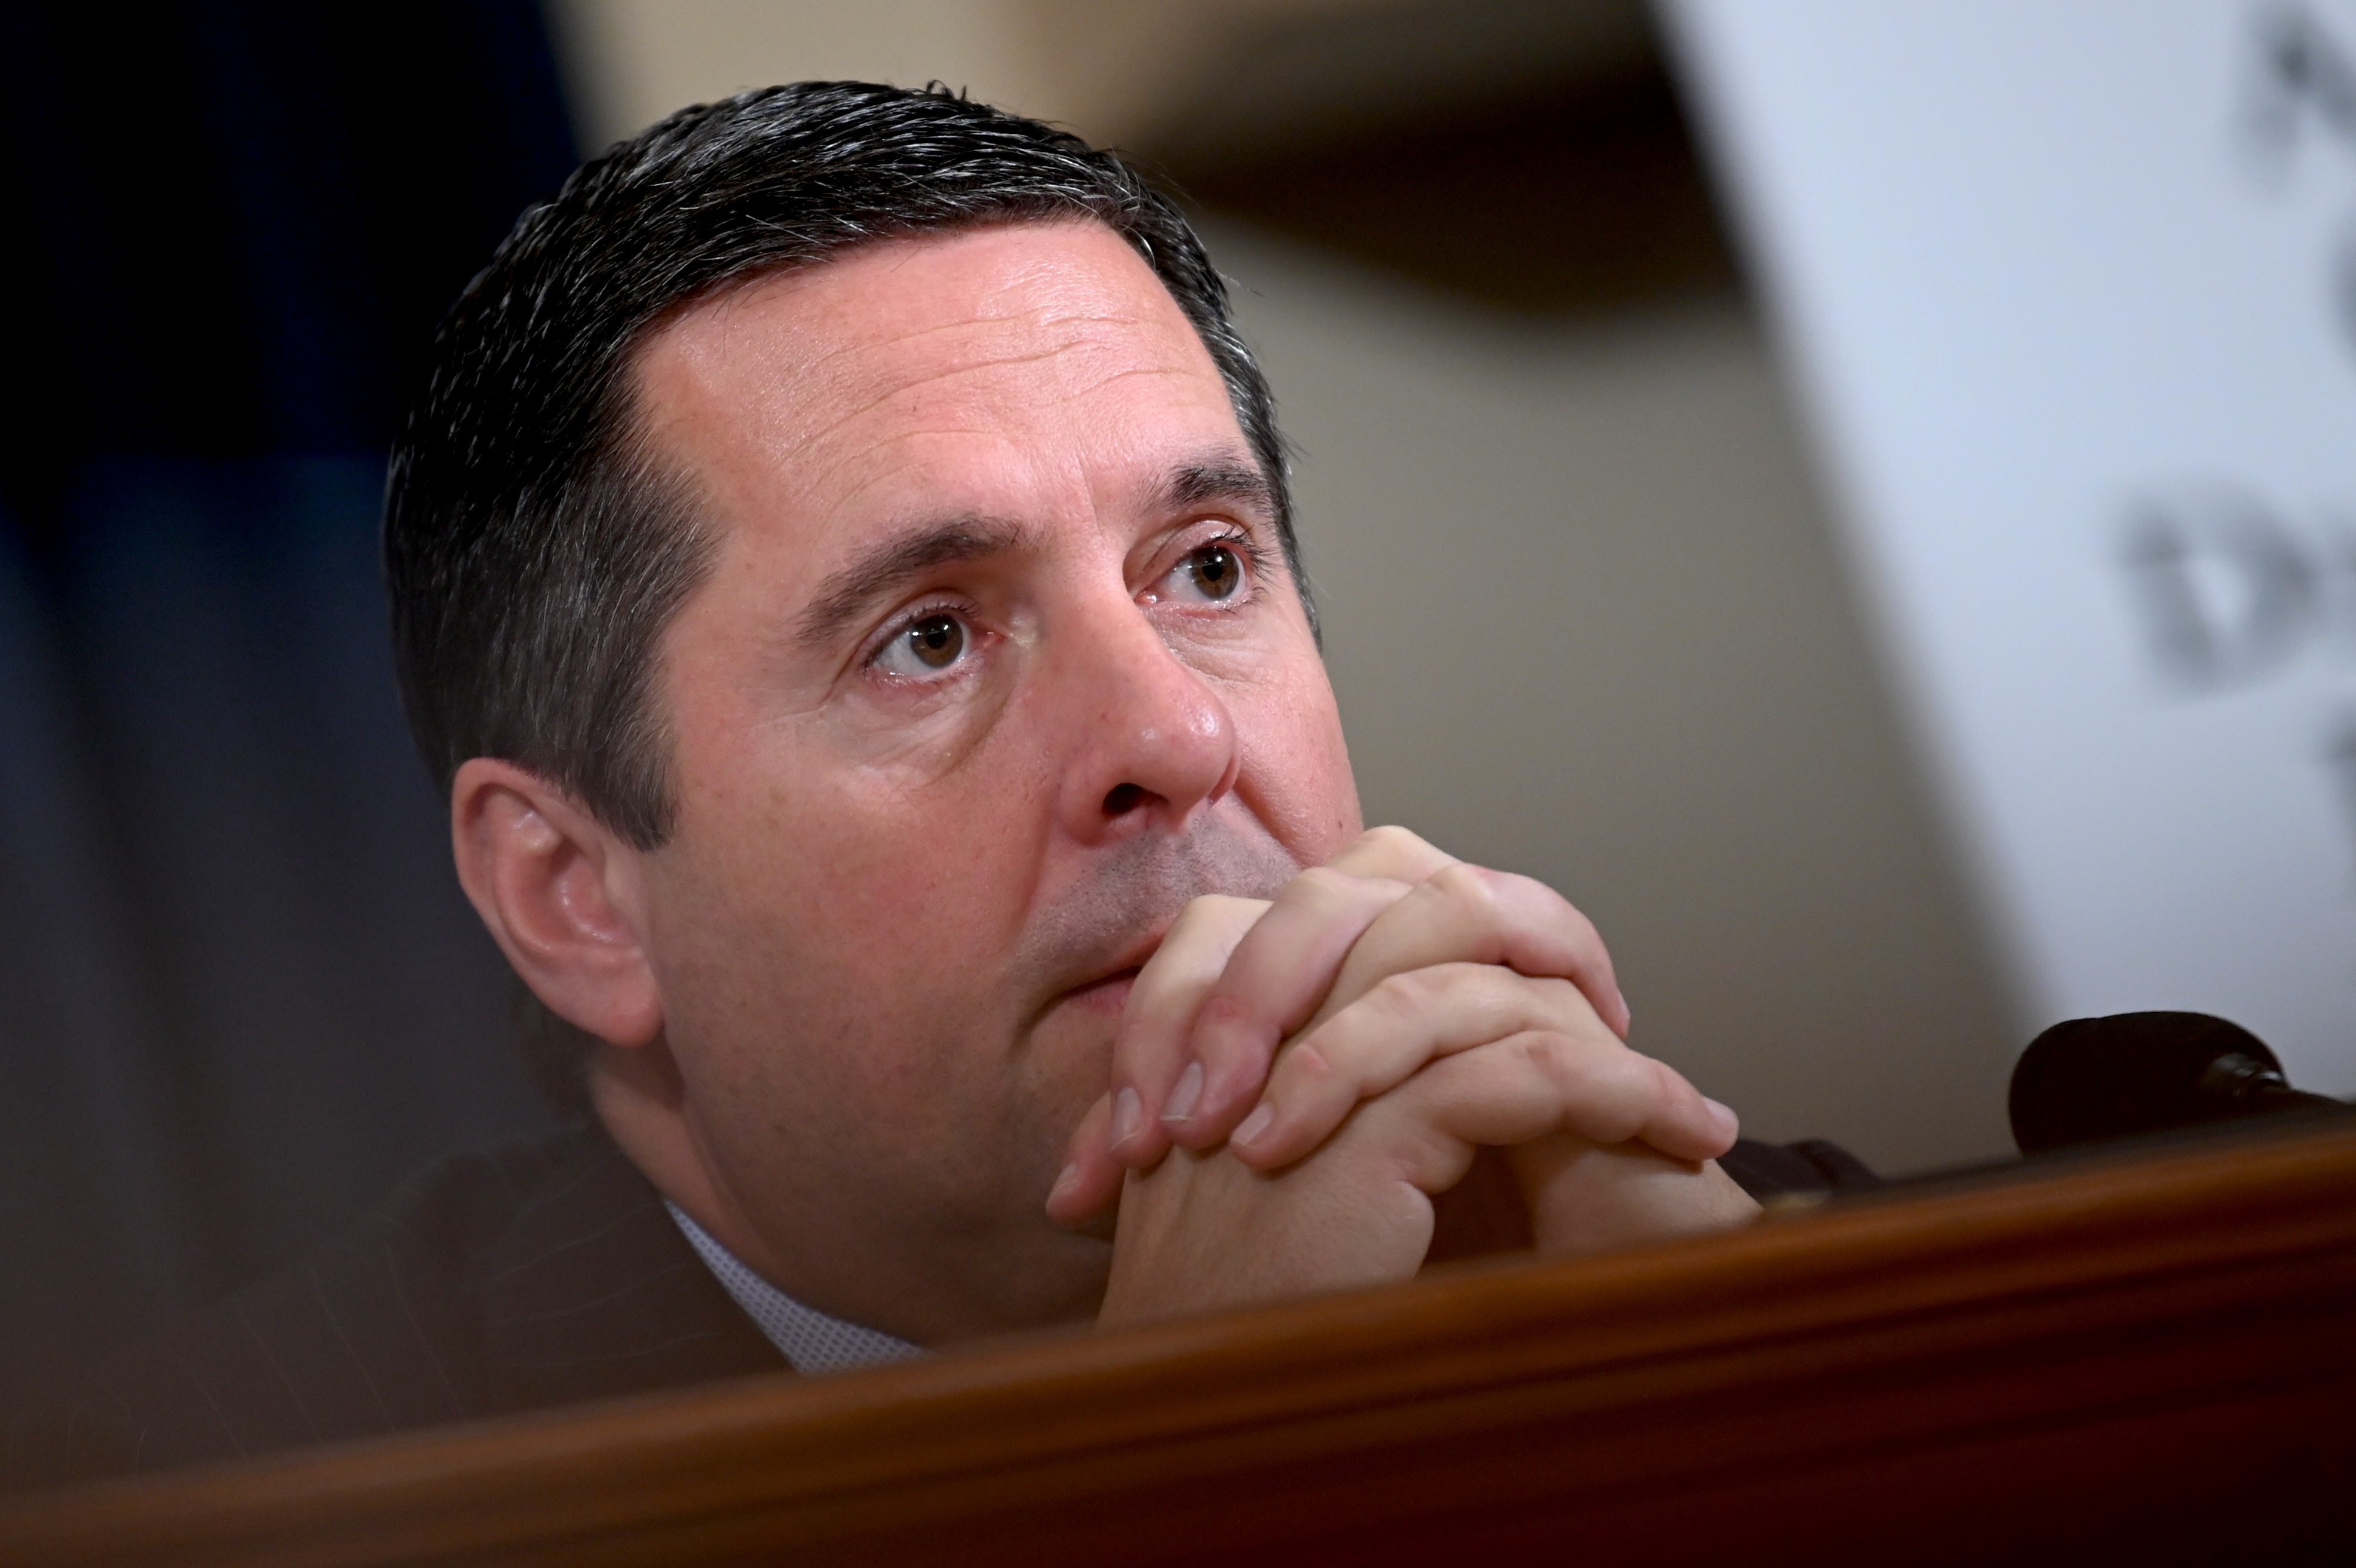 Devin Nunes predicts that the Republican Party will be pressured to accuse Biden if he takes the house in 2022